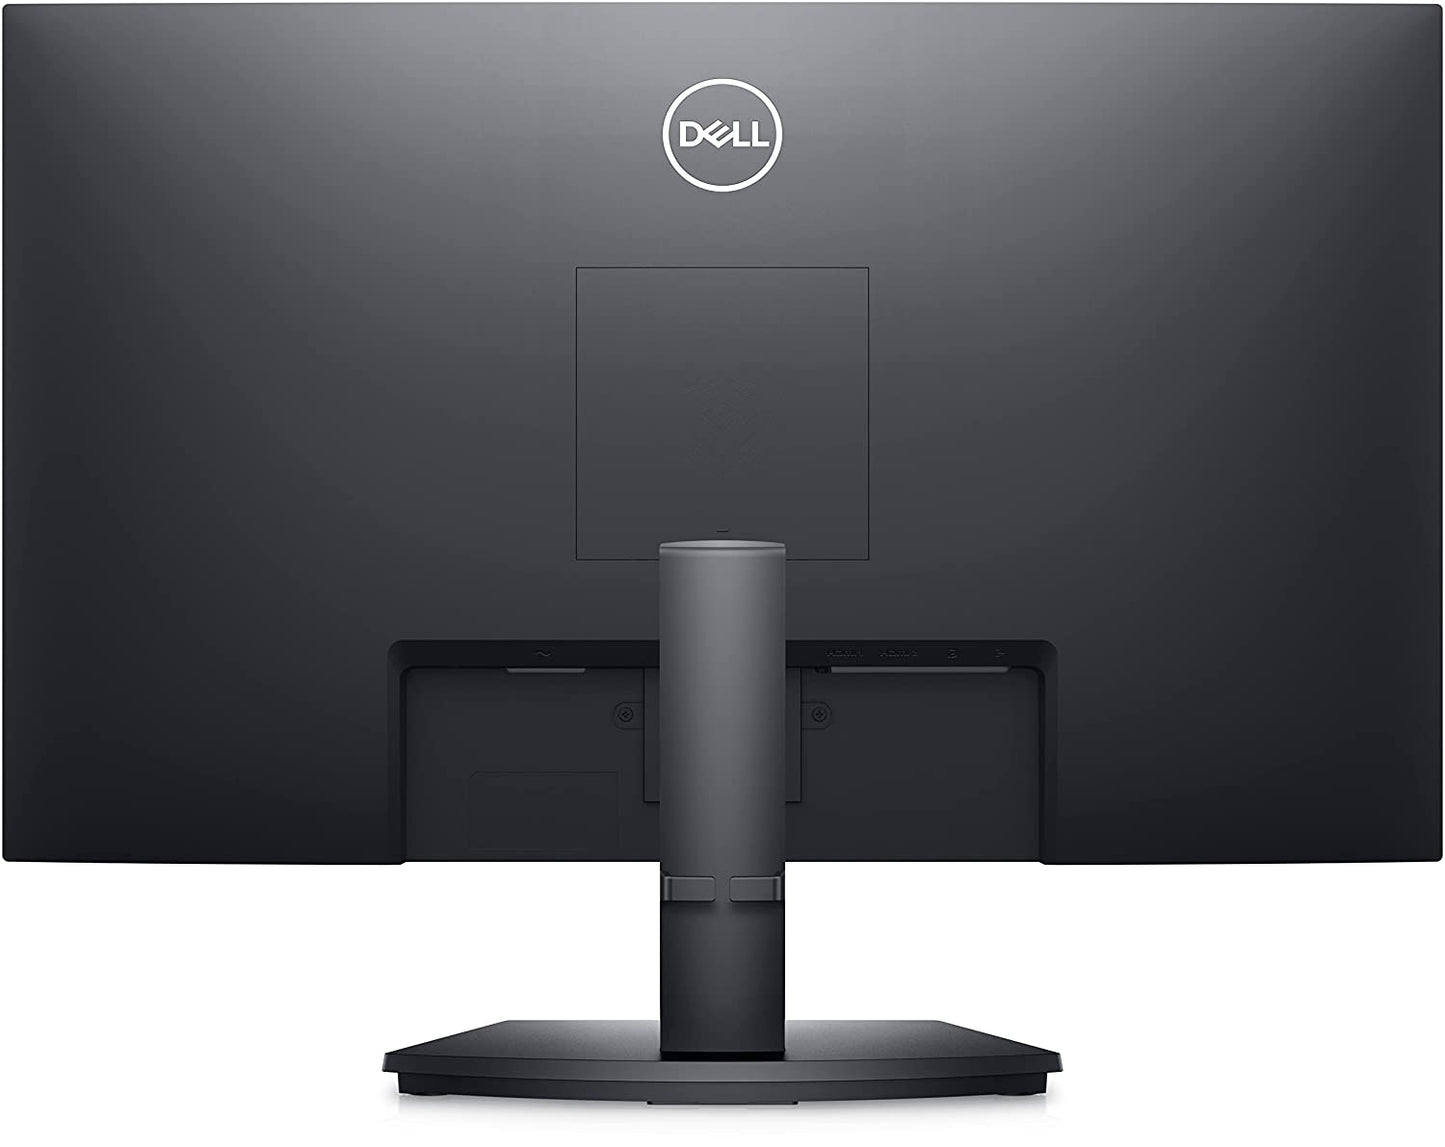 Dell Monitor SE2723DS 27", IPS, QHD, 2560 x 1440, 16:9, 8 ms, 350 cd/m², Black, 75 Hz, HDMI and Display Port, 5 Year Warranty